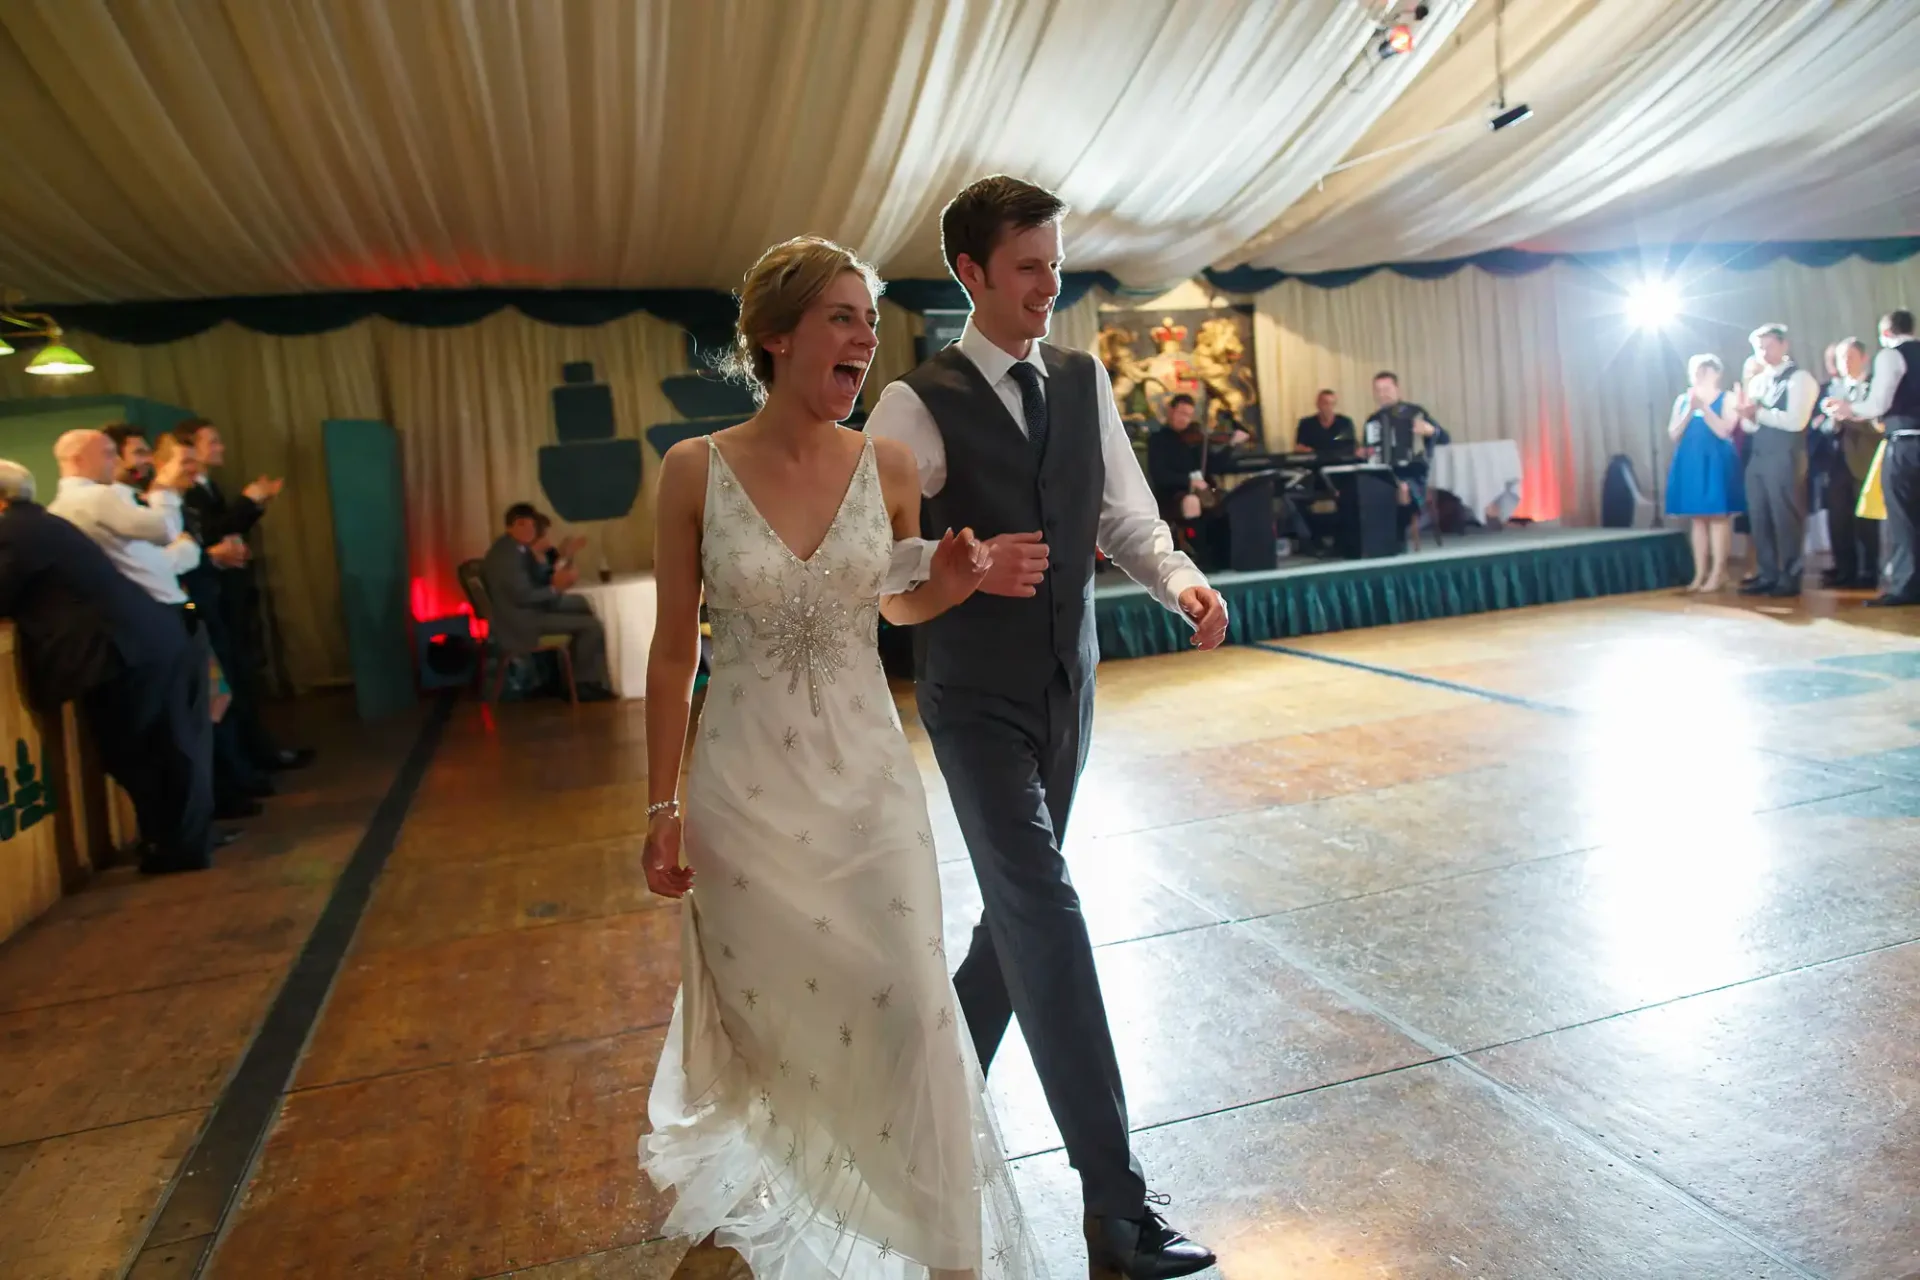 A bride and groom walk hand in hand, smiling, across a dance floor with guests watching in the background at a wedding reception.